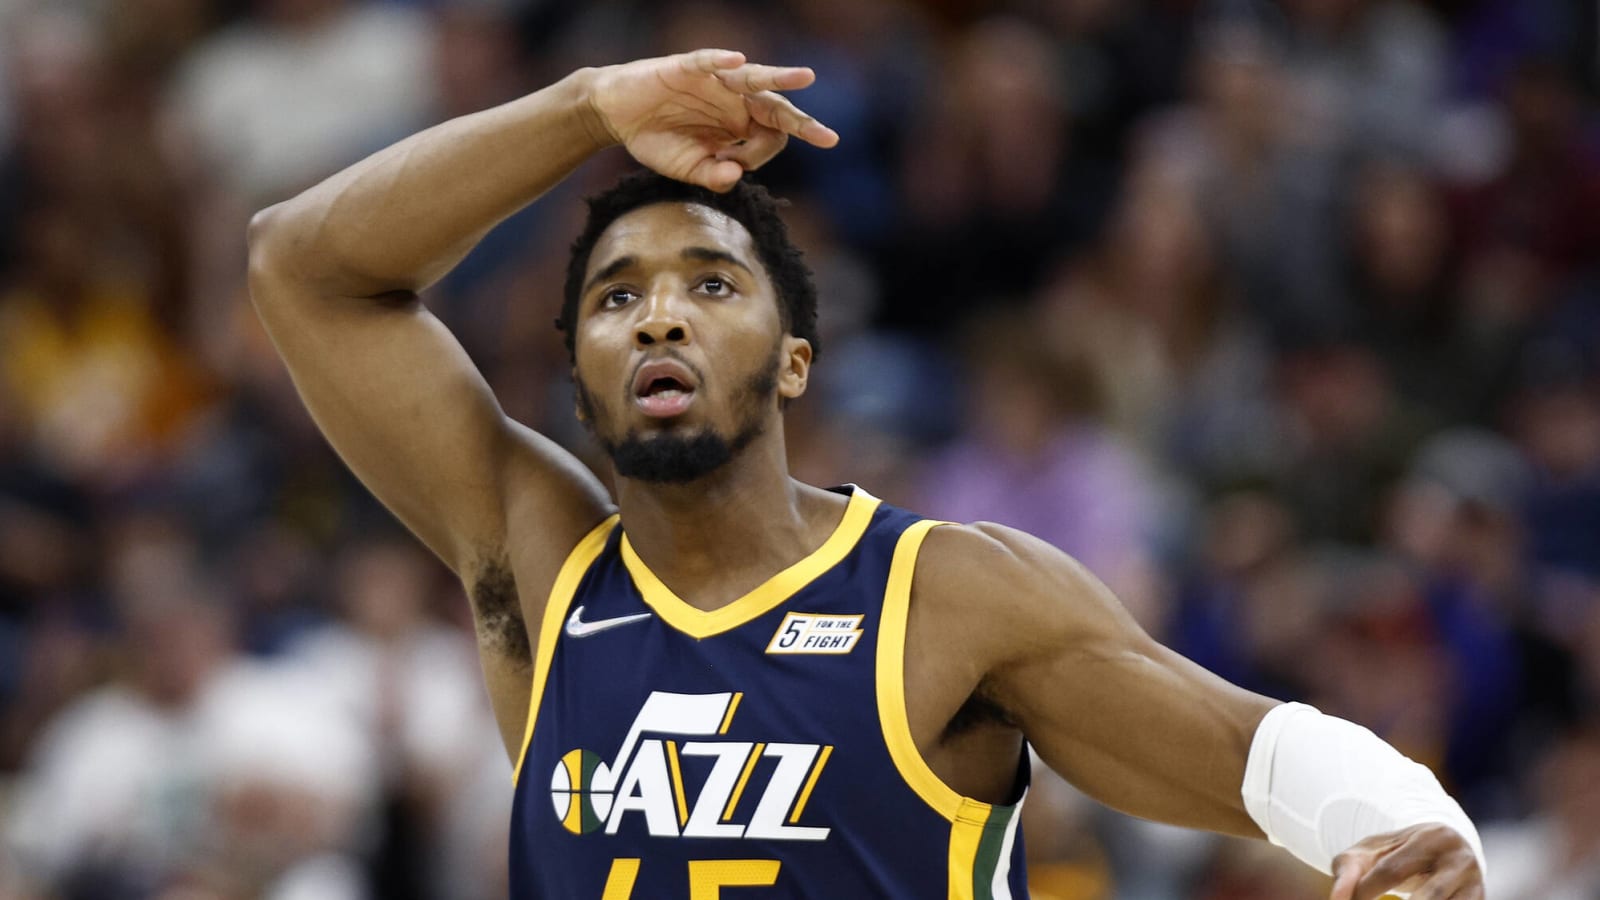 Heat, Knicks reportedly 'interested in dialogue' on Jazz All-Star Donovan Mitchell